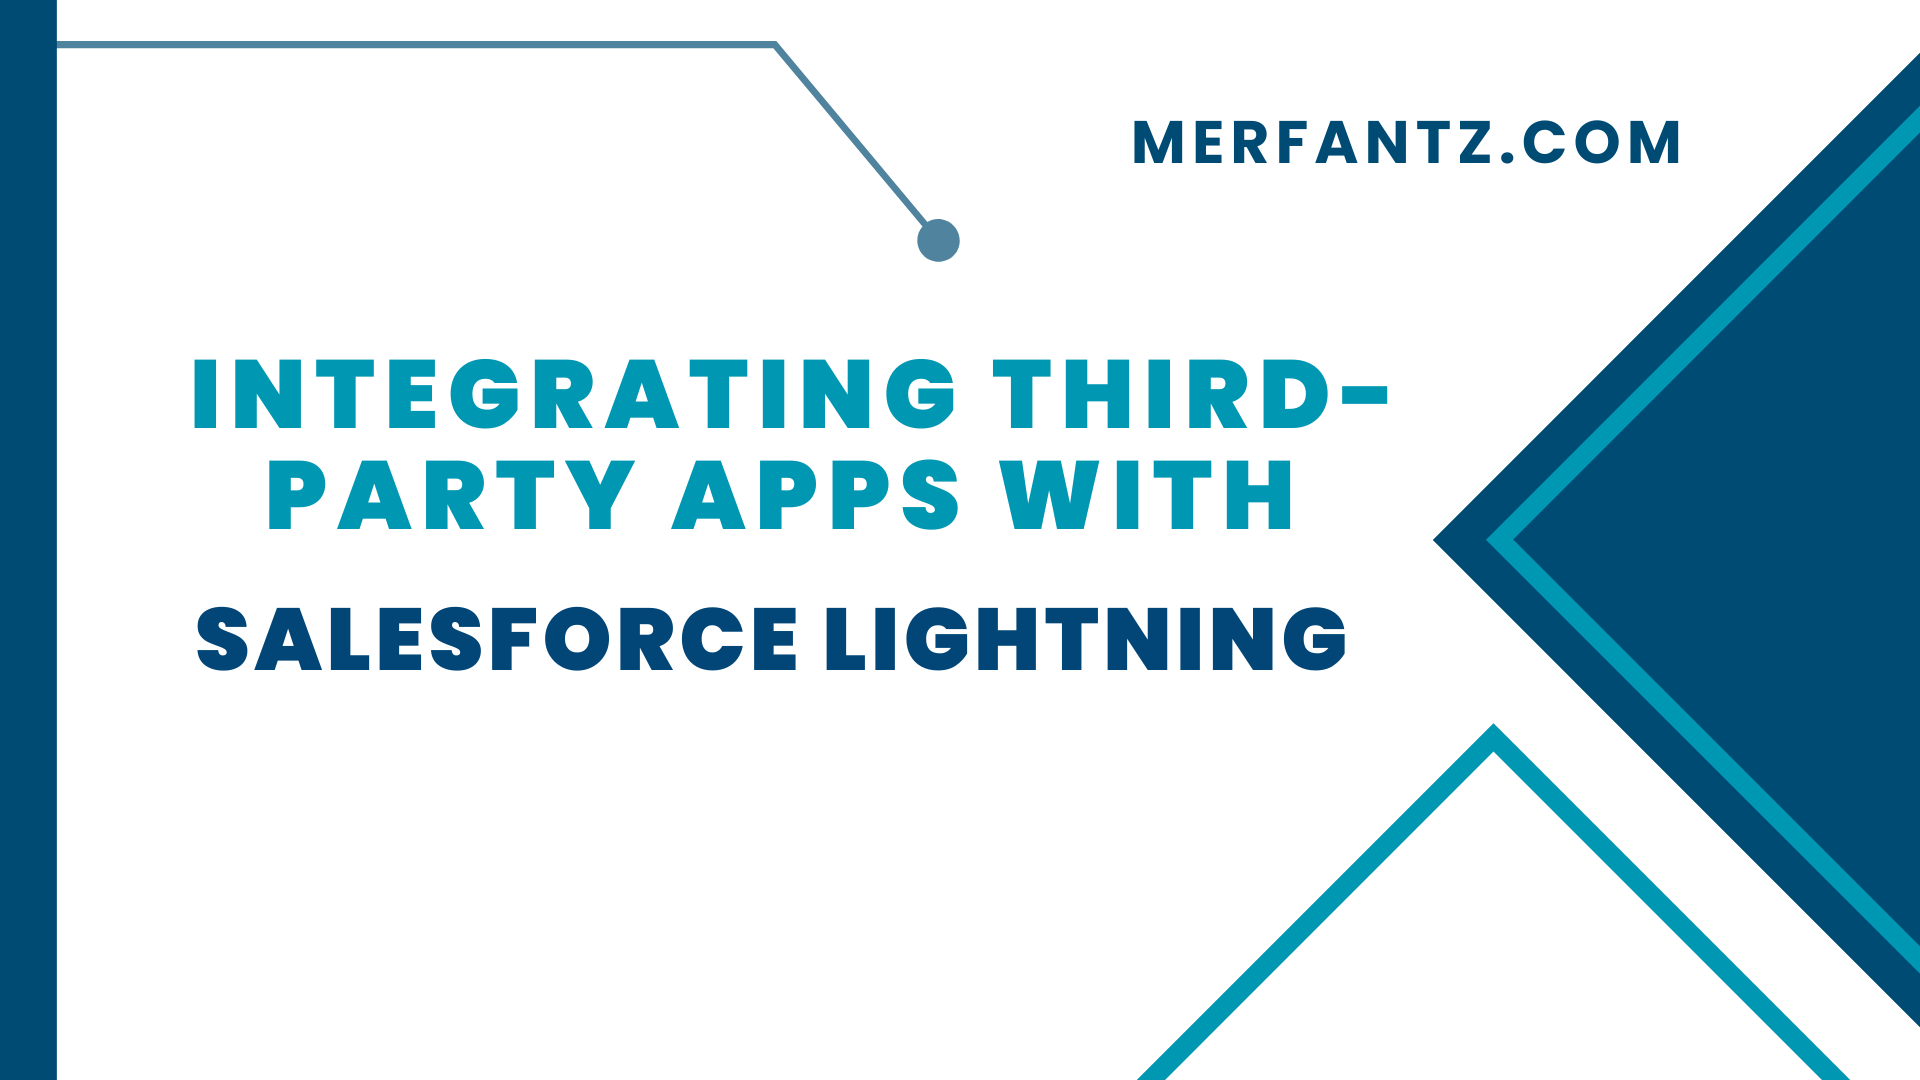 Integrating Third-Party Apps with Salesforce Lightning